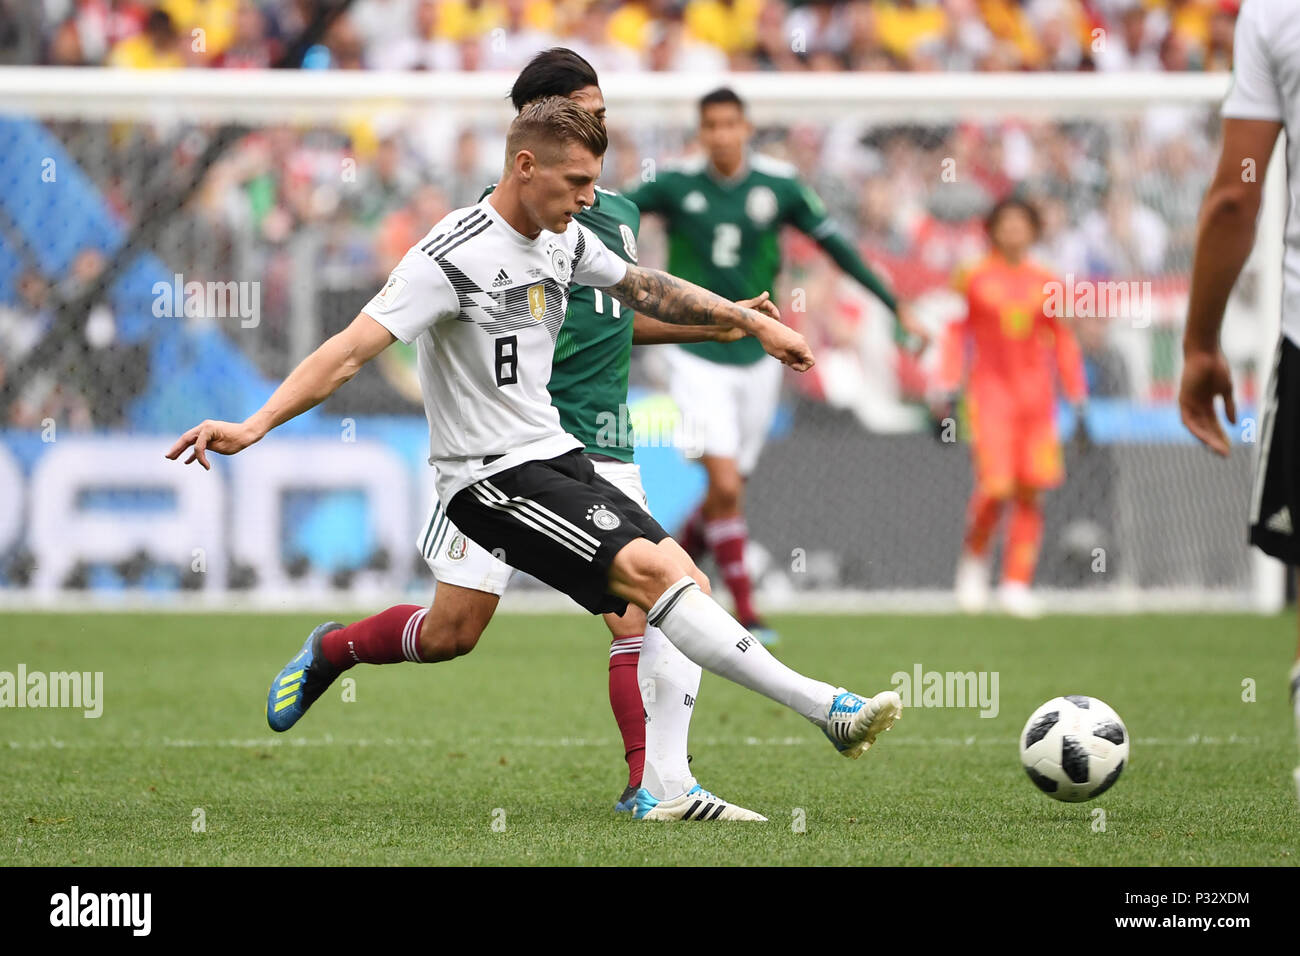 Moscow, Russia. 17th June, 2018. Toni Kroos (Germany, l.) Versus Carlos Vela (Mexico, r.). GES/Football/World Cup 2018 Russia: Germany - Mexico, 17.06.2018 GES/Soccer/Football/Worldcup 2018 Russia: Germany vs Mexico, Moscow, June 17, 2018 | usage worldwide Credit: dpa/Alamy Live News Stock Photo